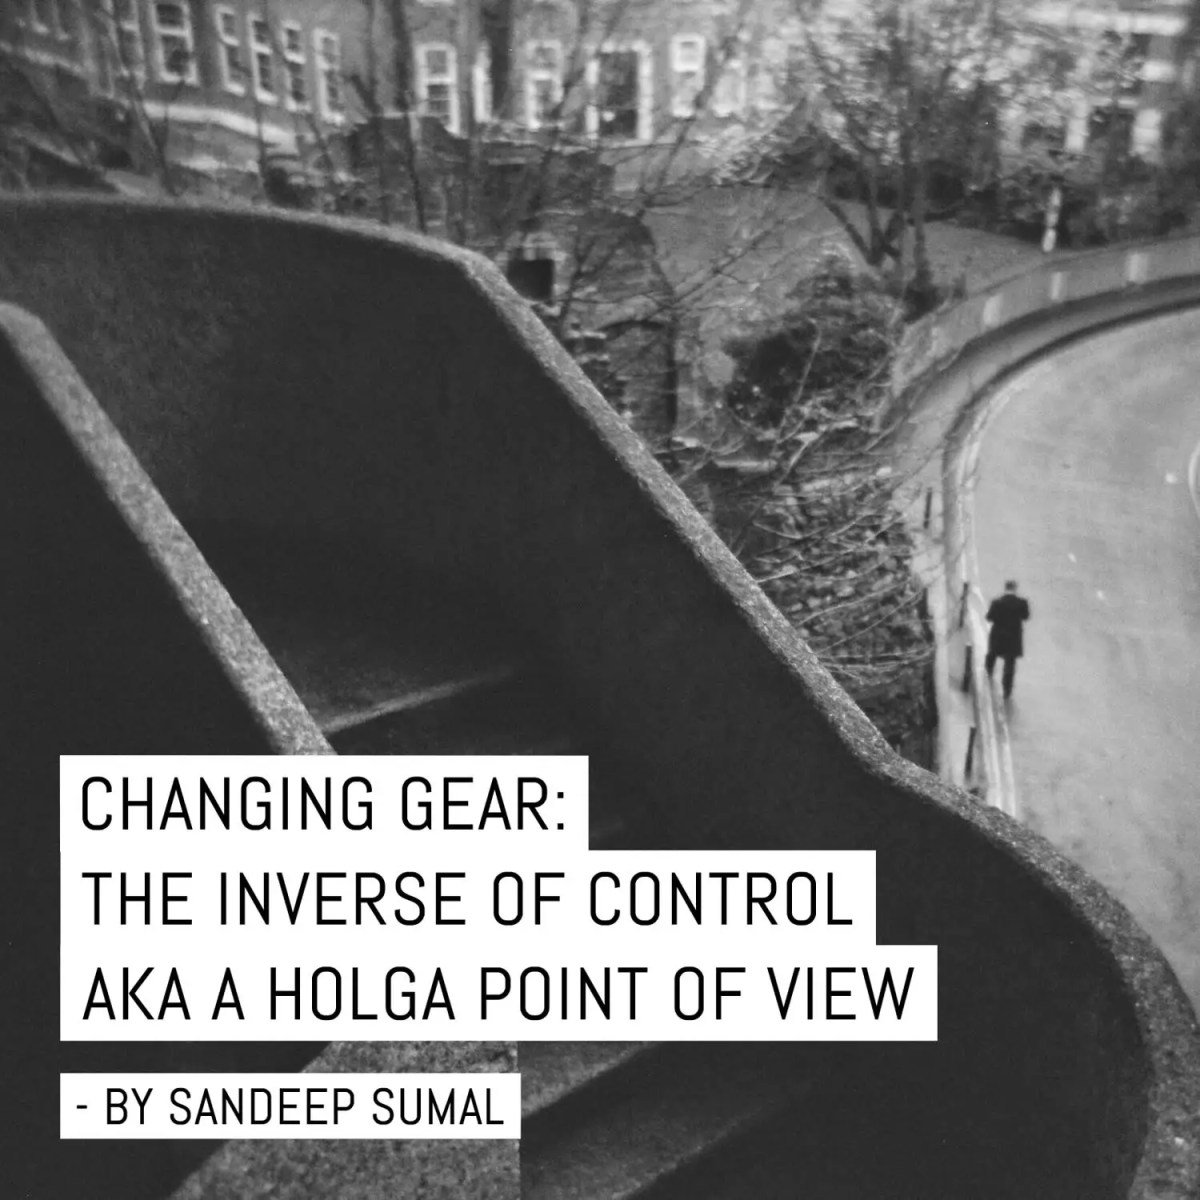 Changing gear: The inverse of control AKA a Holga point of view